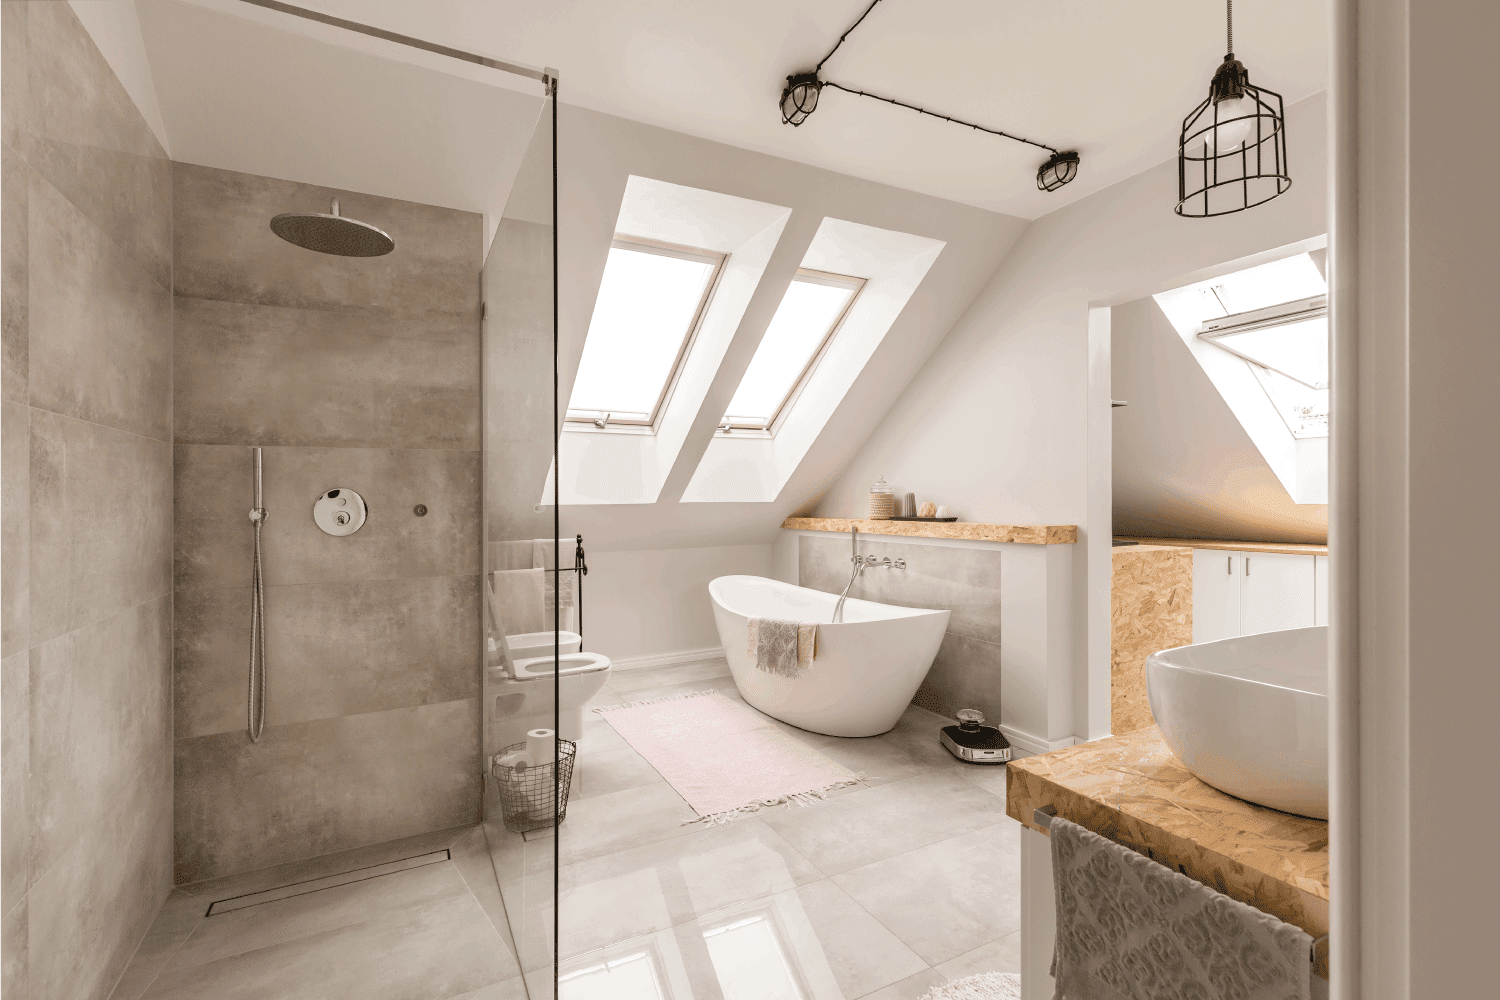 Modern bathroom interior with minimalistic shower and lighting, white toilet, sink, bathtub and roof windows. glossy floor tile